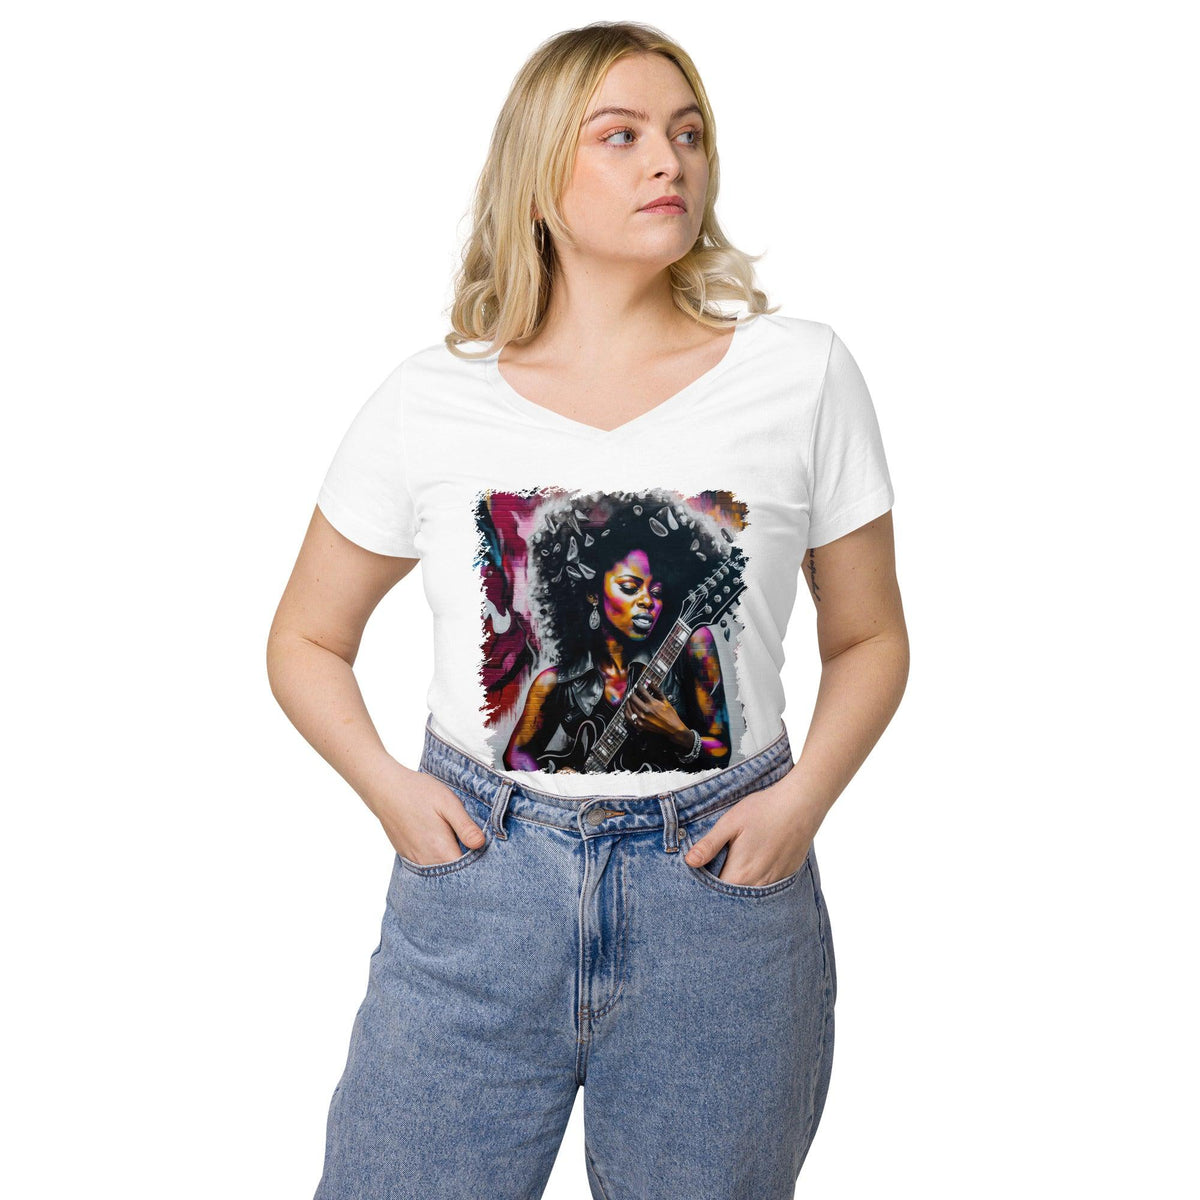 Rocking Out, Feminine Style Women’s Fitted V-neck T-shirt - Beyond T-shirts